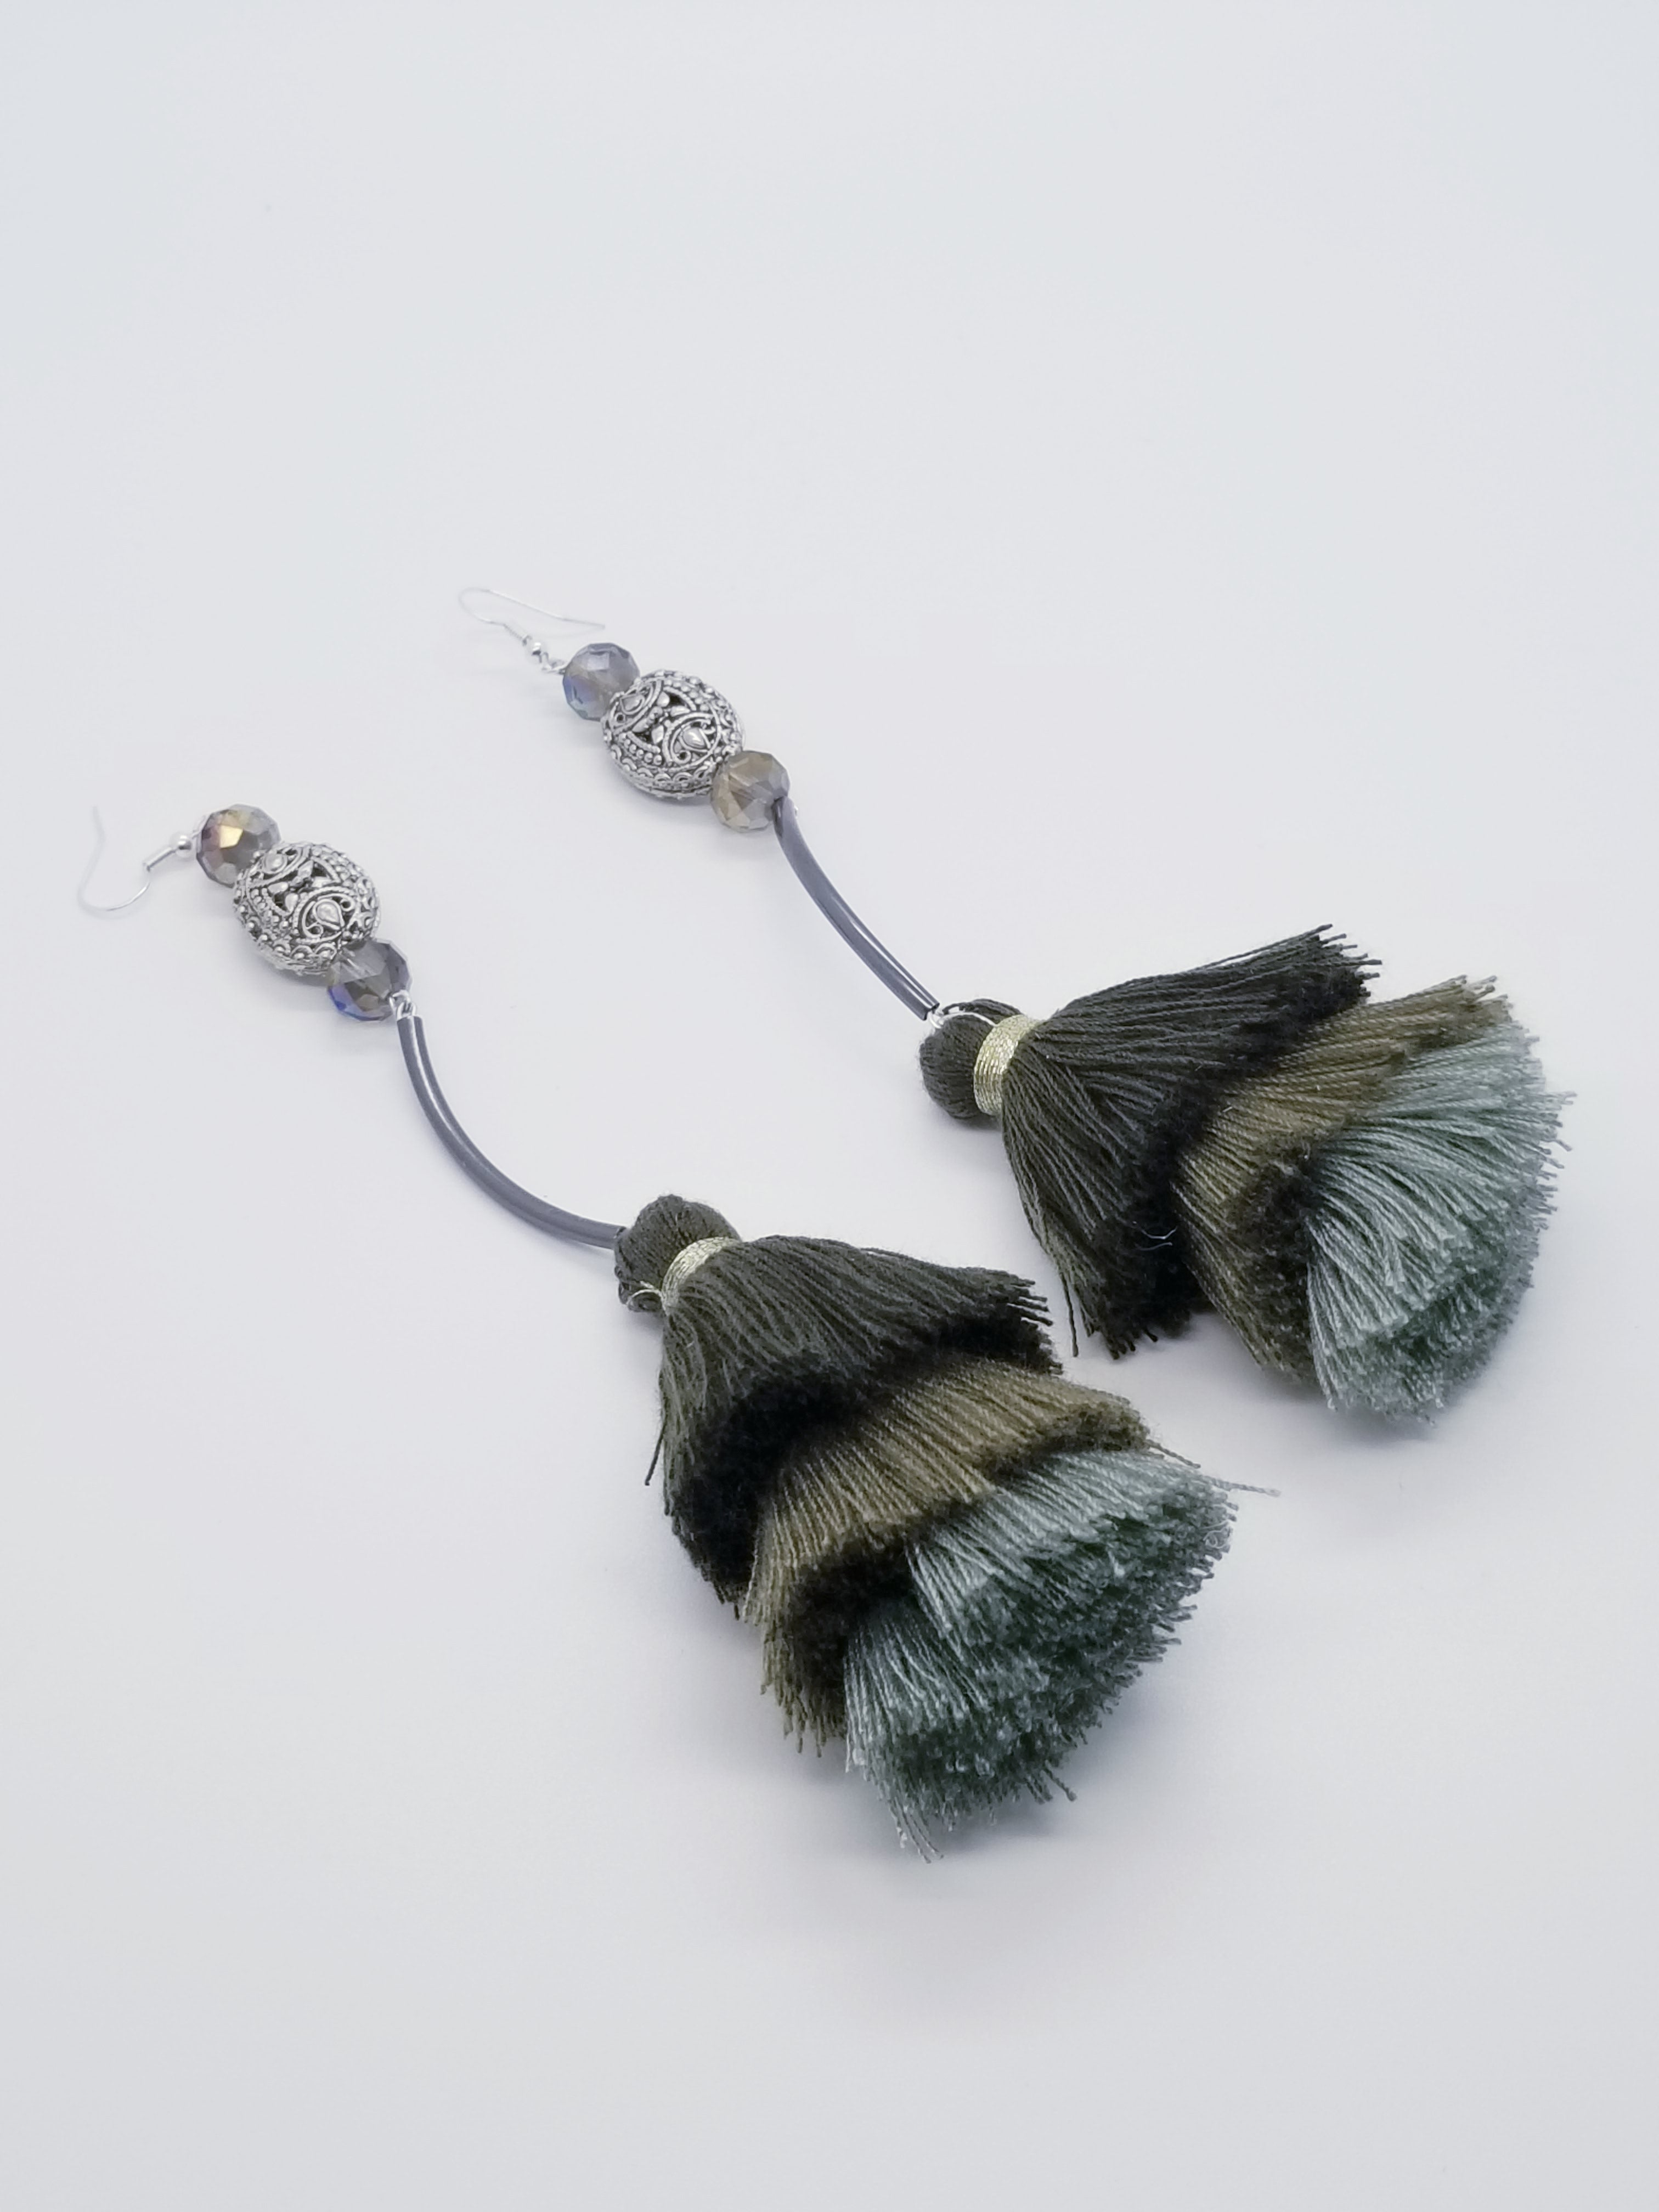 PLEASE BE AWARE: Earrings Hang Past Shoulders  5.5 inches or more  Length: 7 inches | Weight: 1 ounce (earlobe supports provided due to weight)  Designed just for you! The earrings are handmade using black, green, seafoam tassels, black curve tube, 10mm faceted crystal, silver filigree charm, and hypoallergenic hooks with back closures. 